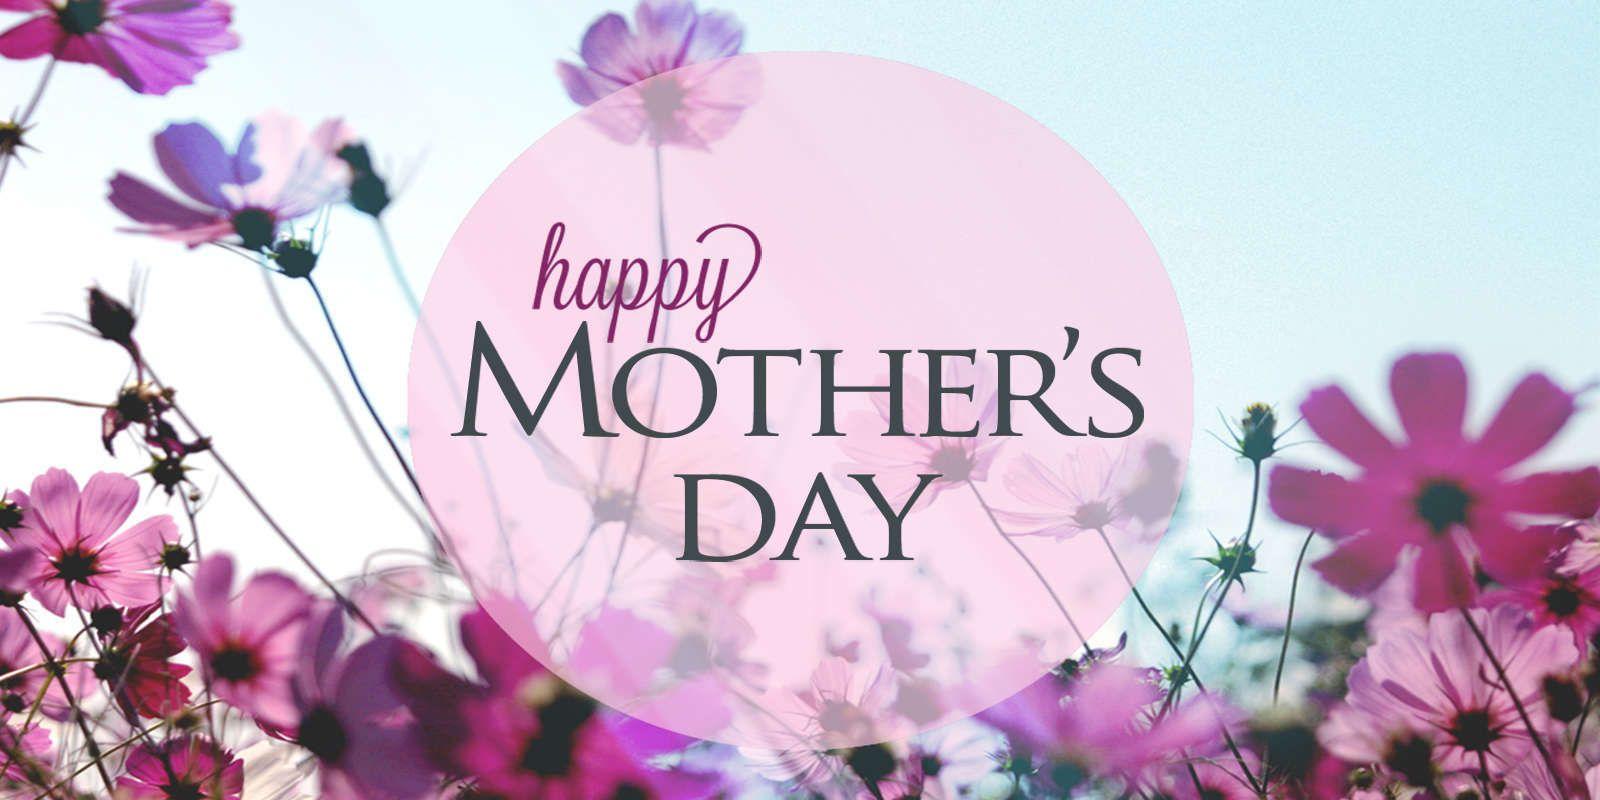 Happy Mother's Day 2018^ Quotes, Wishes, Messages, Image & Cards